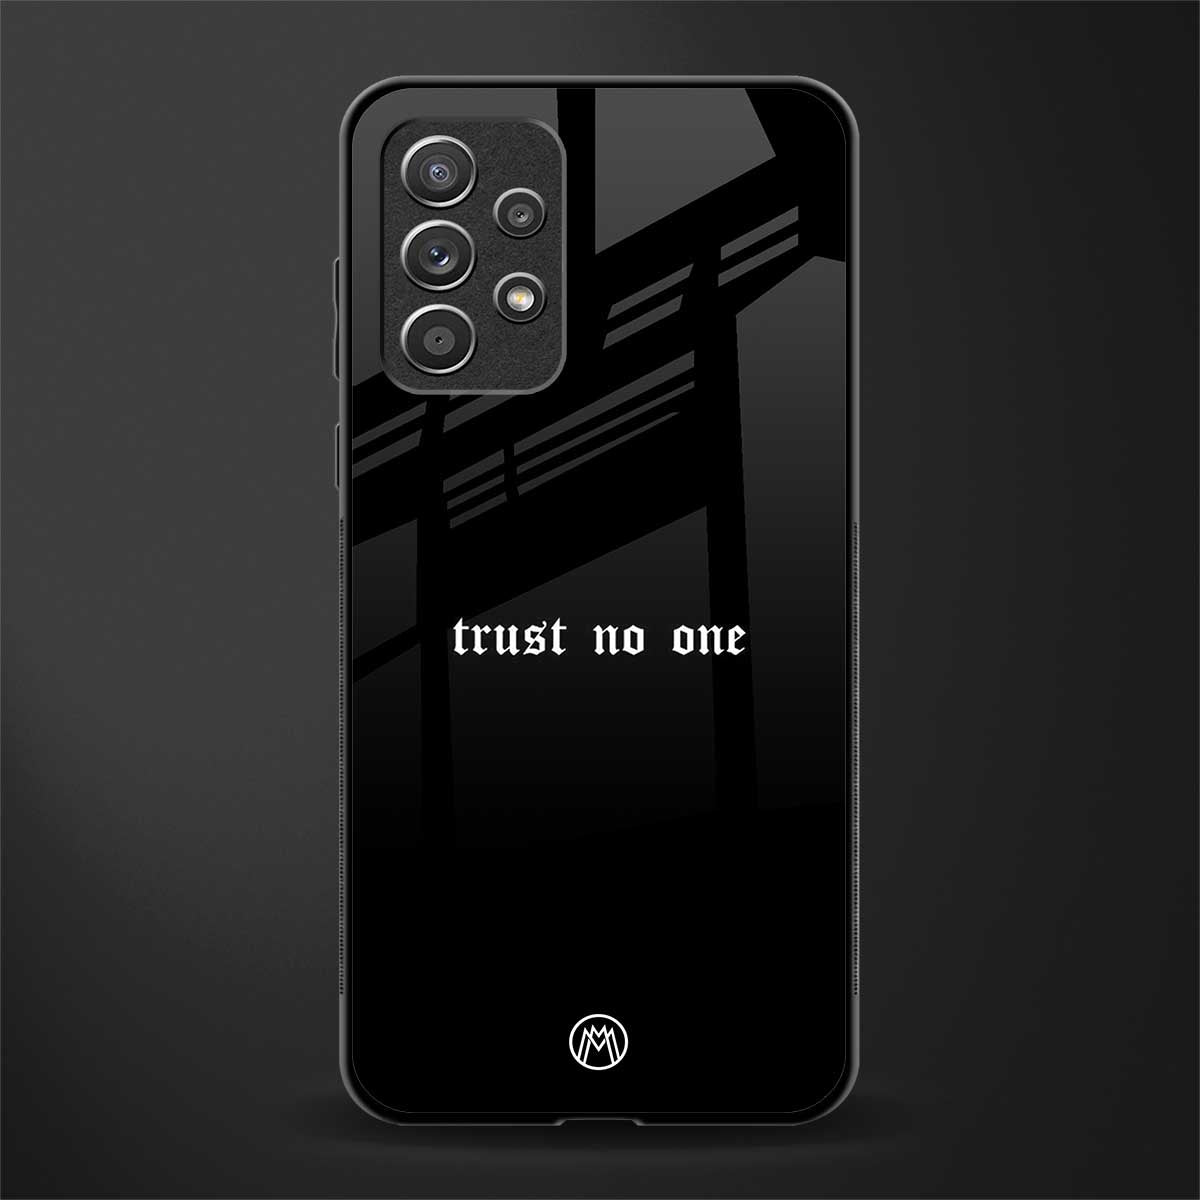 trust no one aesthetic quote glass case for samsung galaxy a52 image